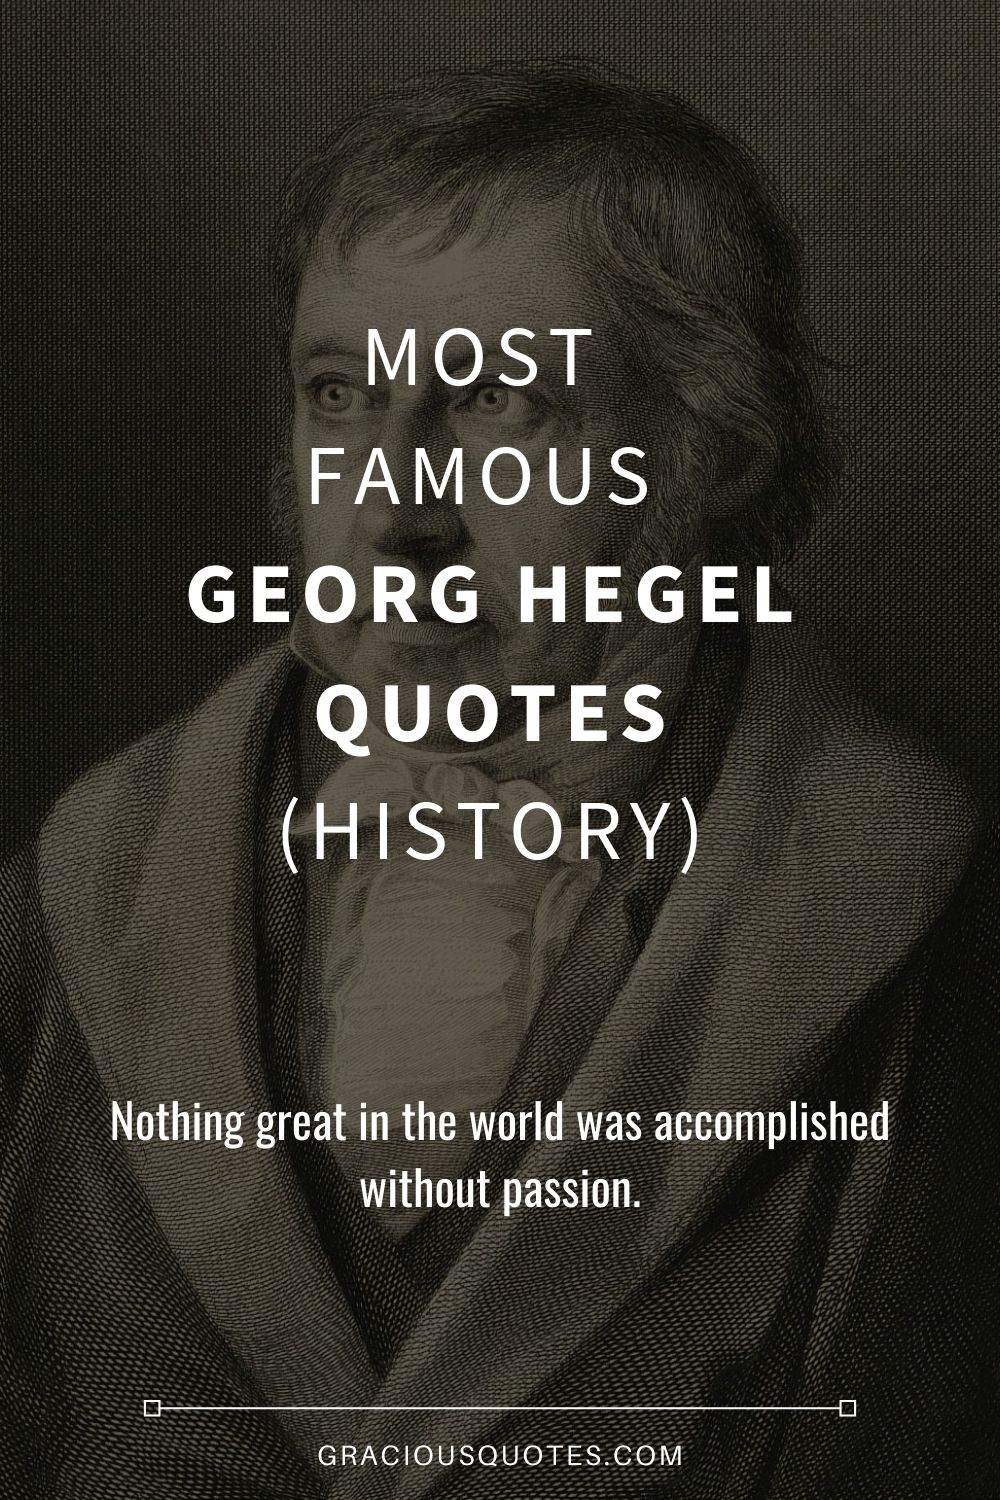 Most Famous Georg Hegel Quotes (HISTORY) - Gracious Quotes